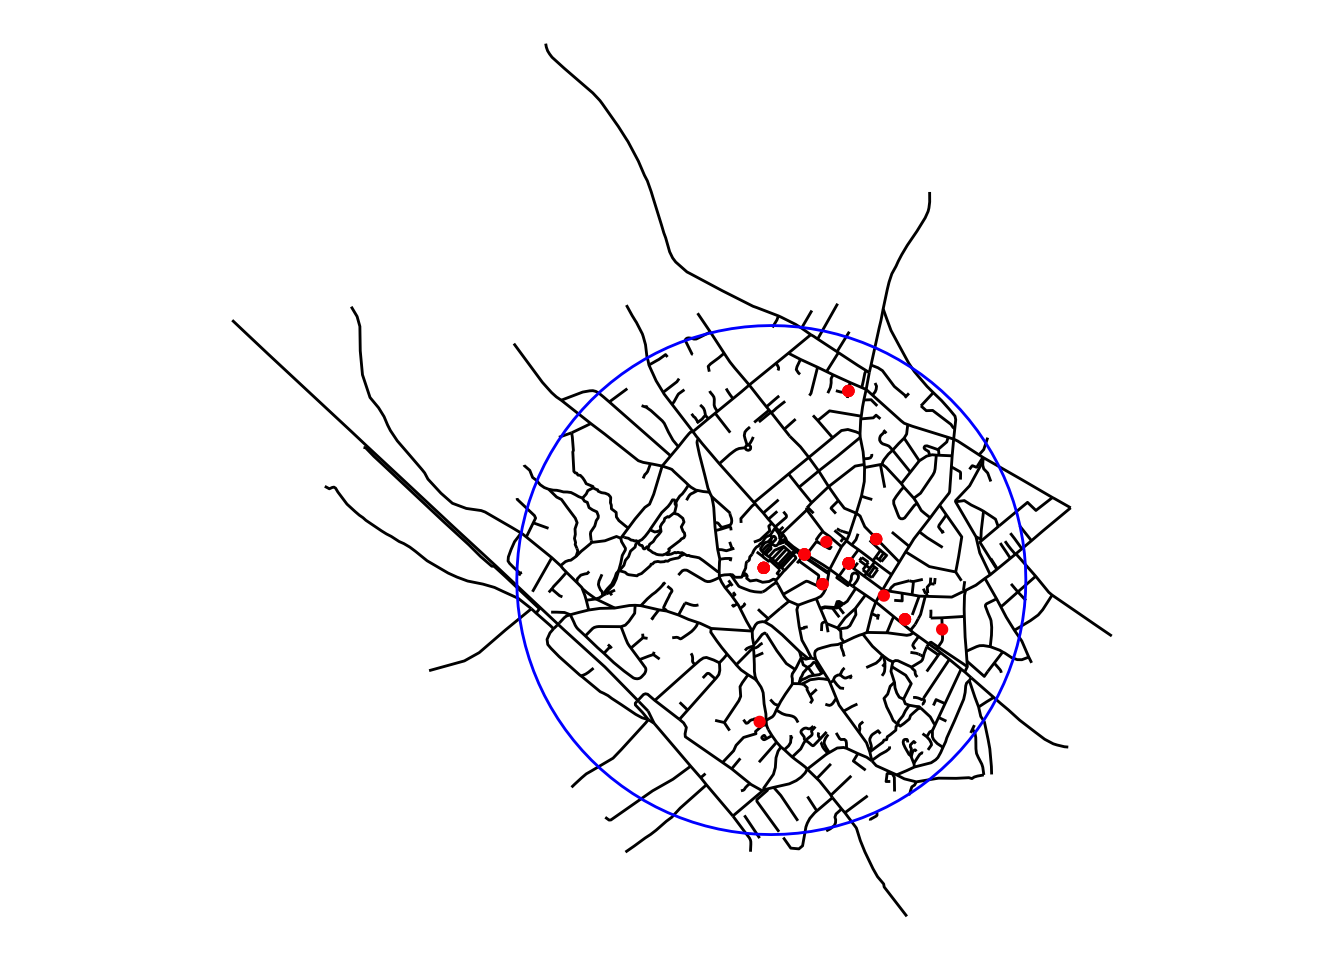 A section of the street line map of Heswall, mostly contained within a large blue circle. A number of red dots appear inside this circle, near the centre and towards the right, with one outlier to the north and one to the south.